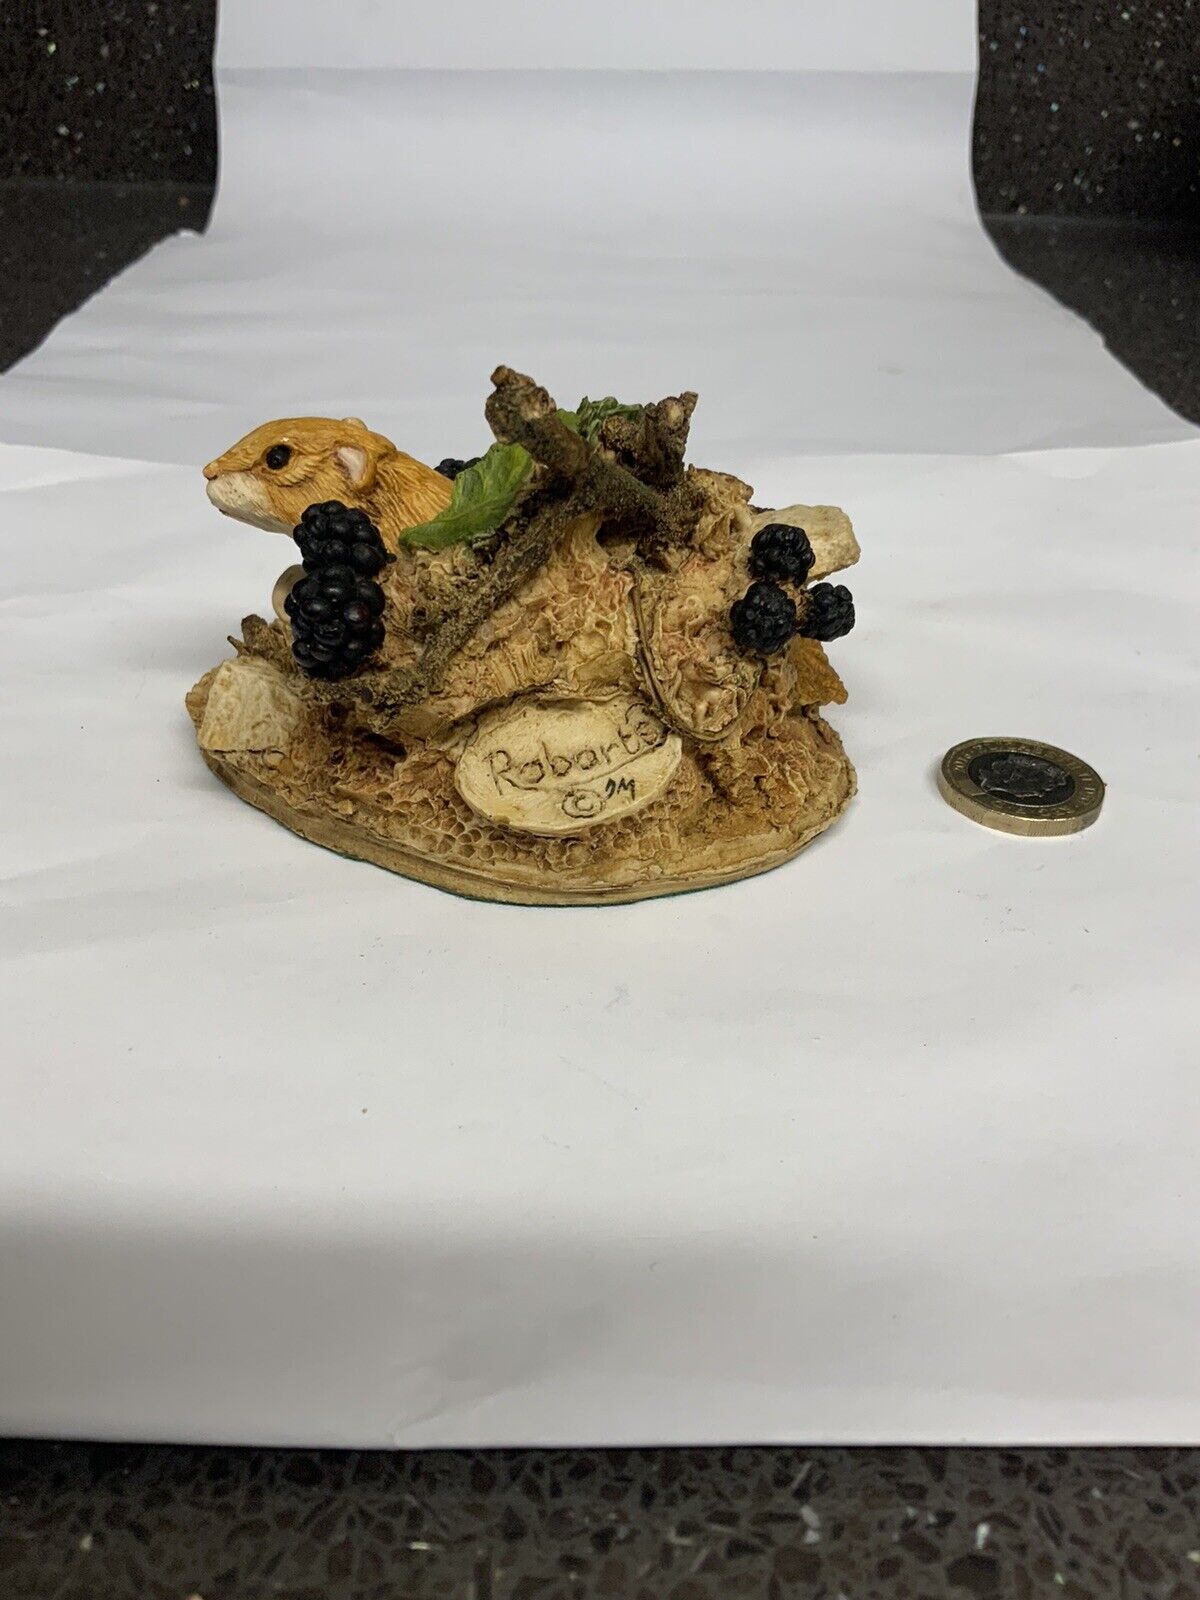 A Robarts Studio’s Sculpture Of A-Mouse In Blackberries Rare (uk only)